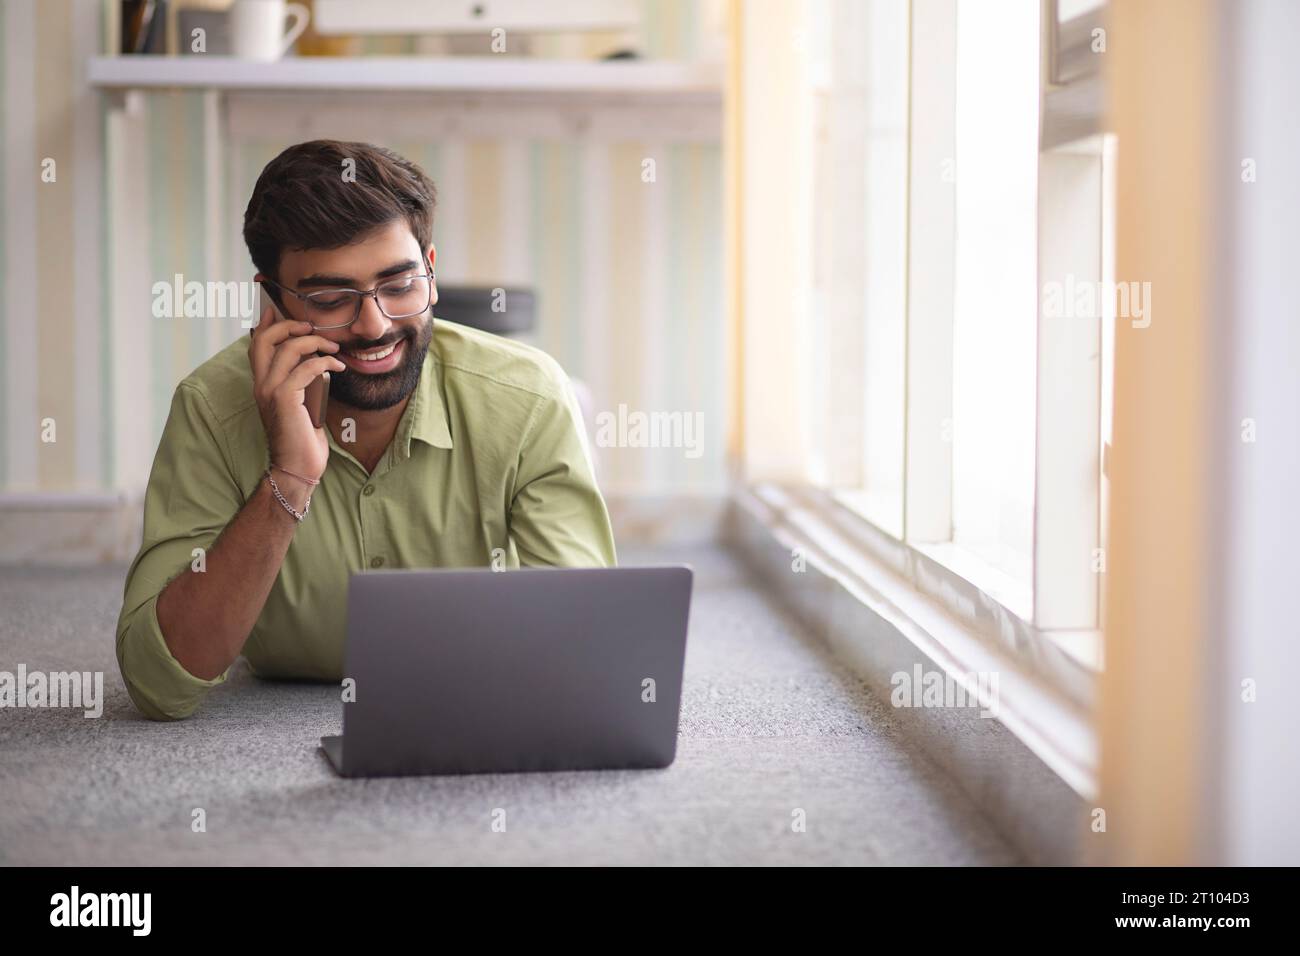 Young man talking on mobile phone while using laptop Banque D'Images